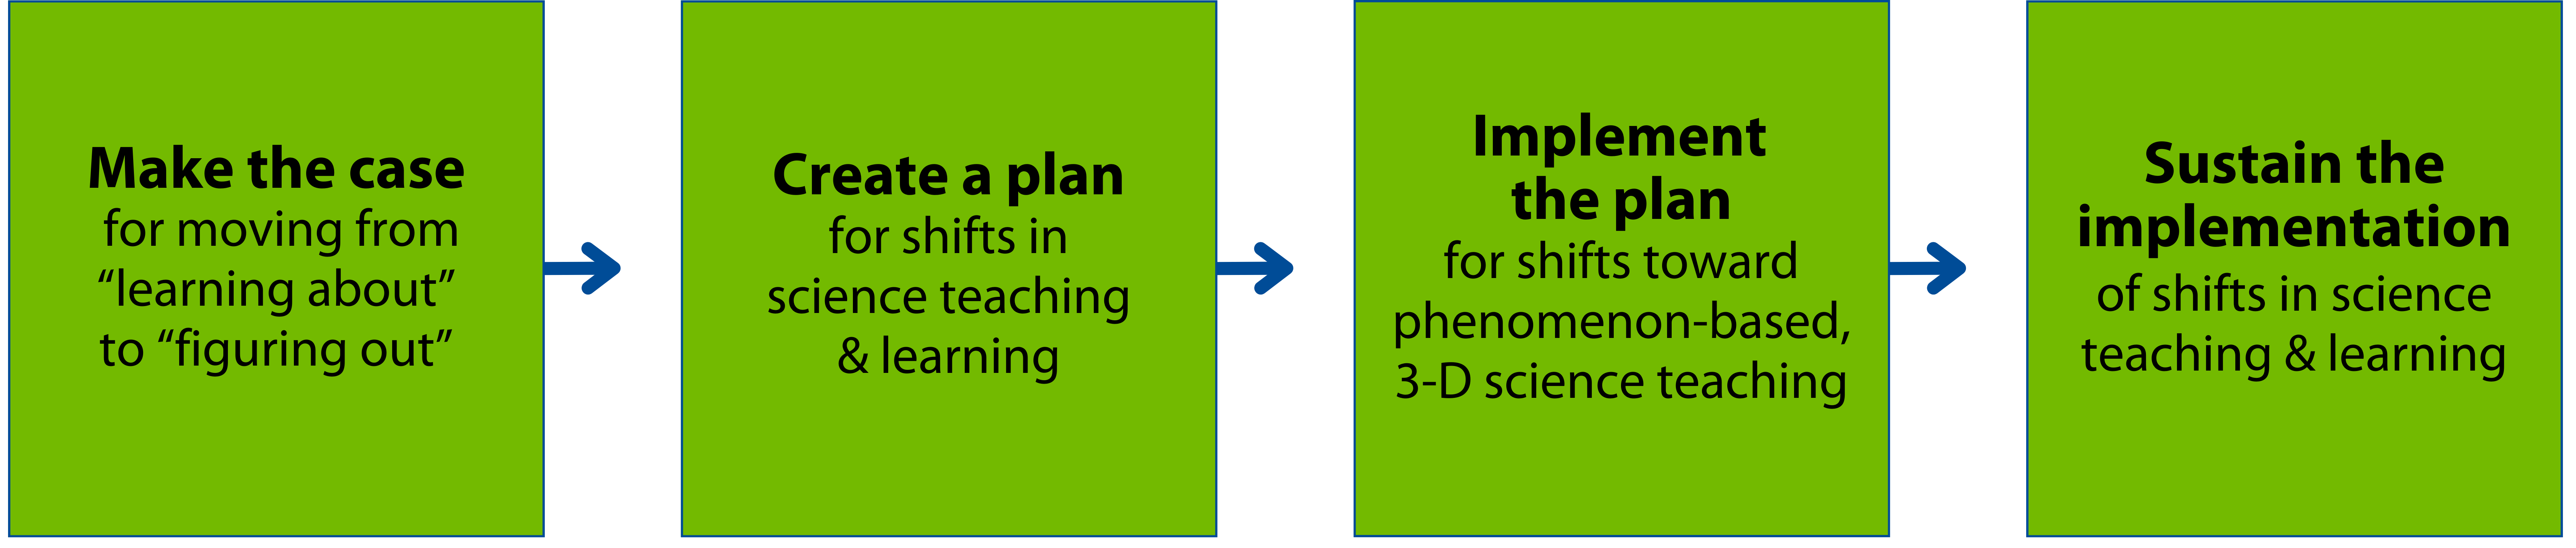 Make the case for moving from "learning about" to "figuring out”; Create a plan for shifts in science teaching & learning; Im